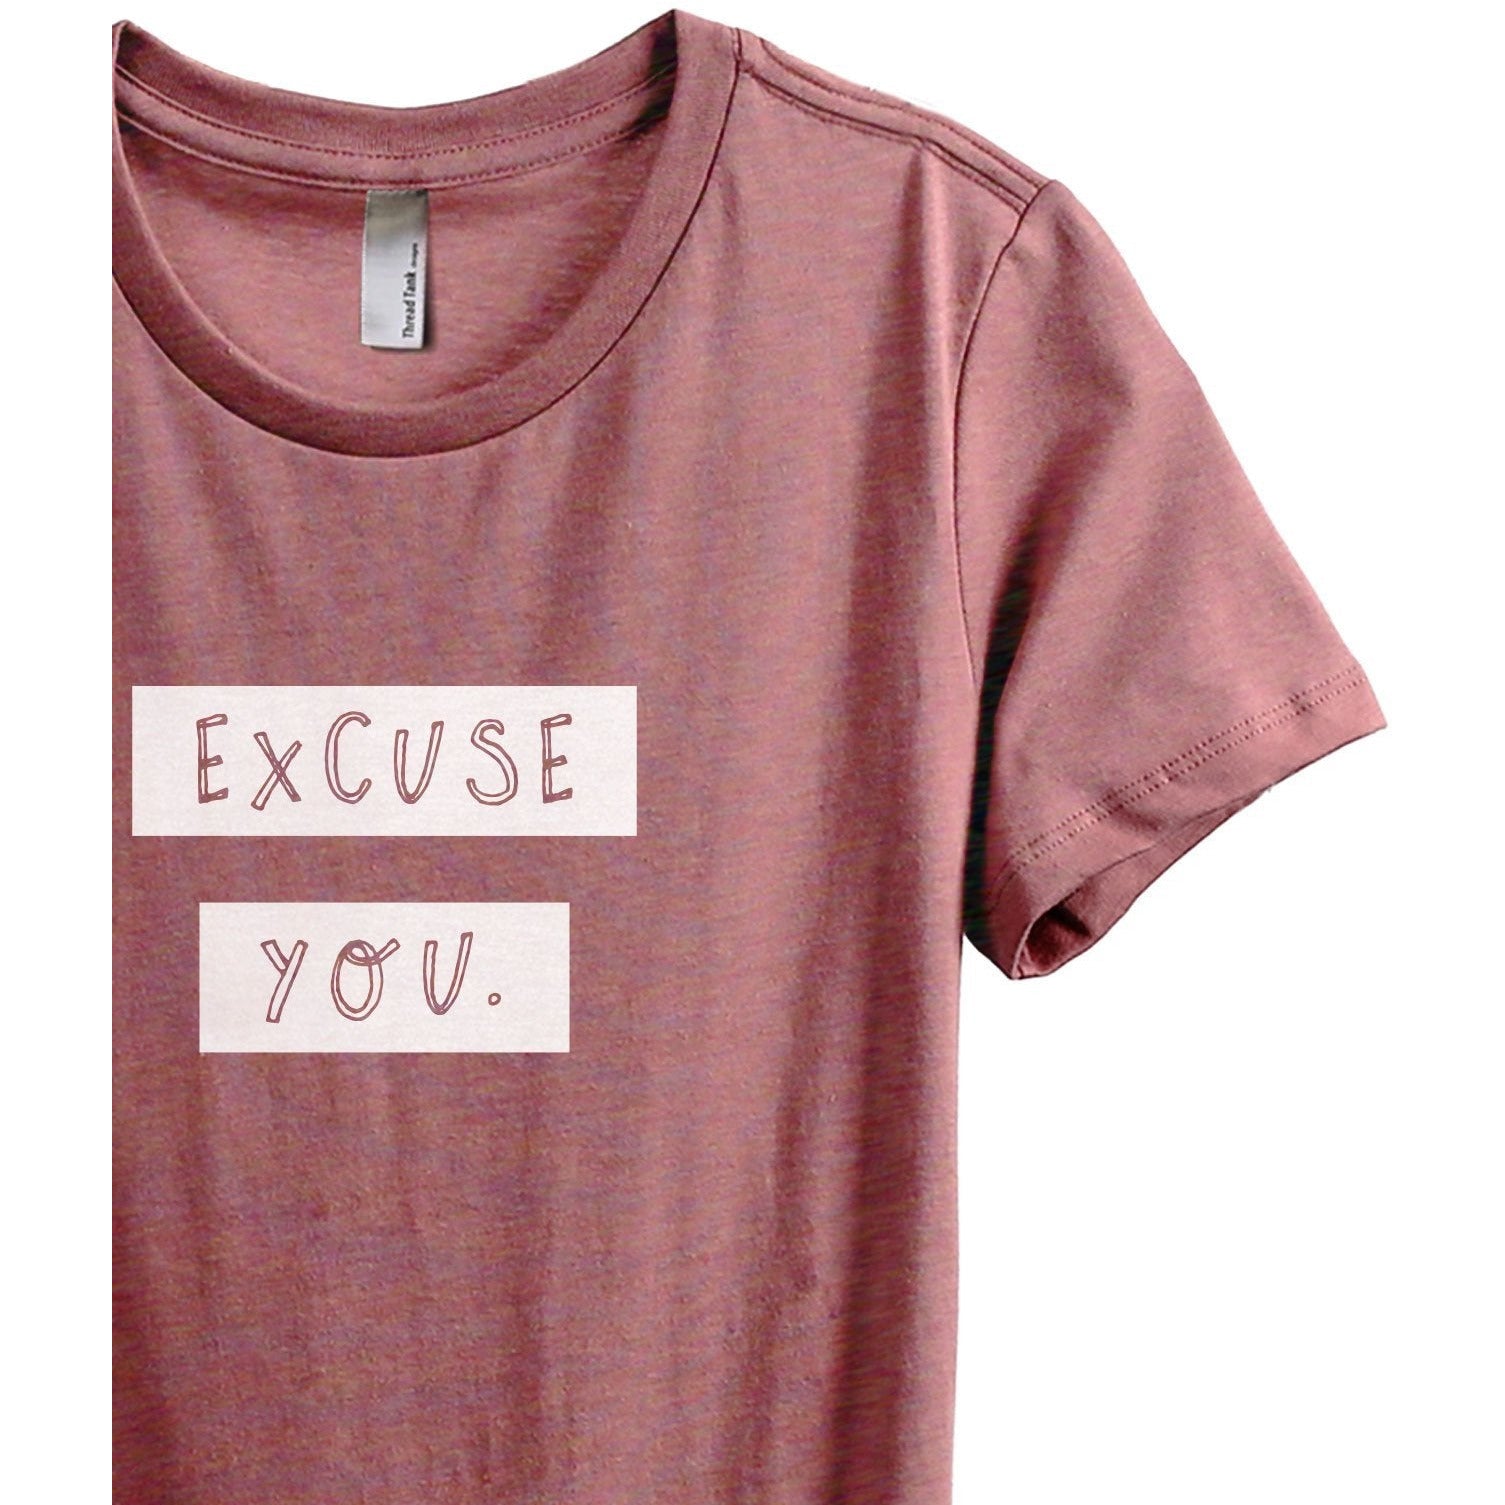 Excuse You Women's Relaxed Crewneck T-Shirt Top Tee Heather Rouge Zoom Details
